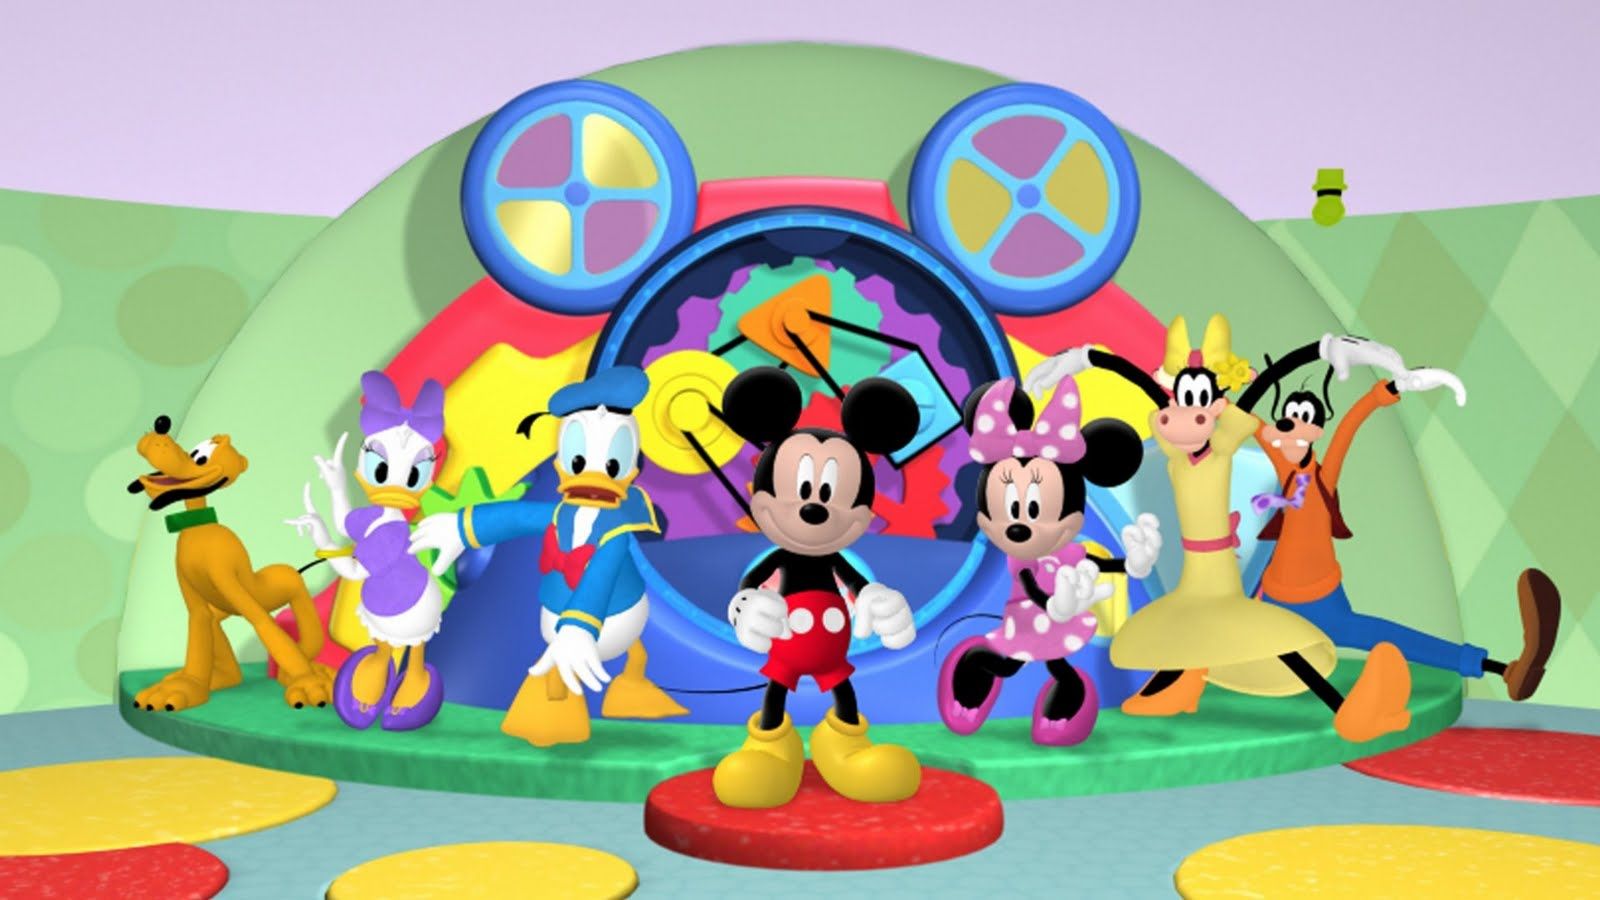 Mickey Mouse Minnie Mouse Donald Duck Daisy Duck Goofy - HD Wallpaper 